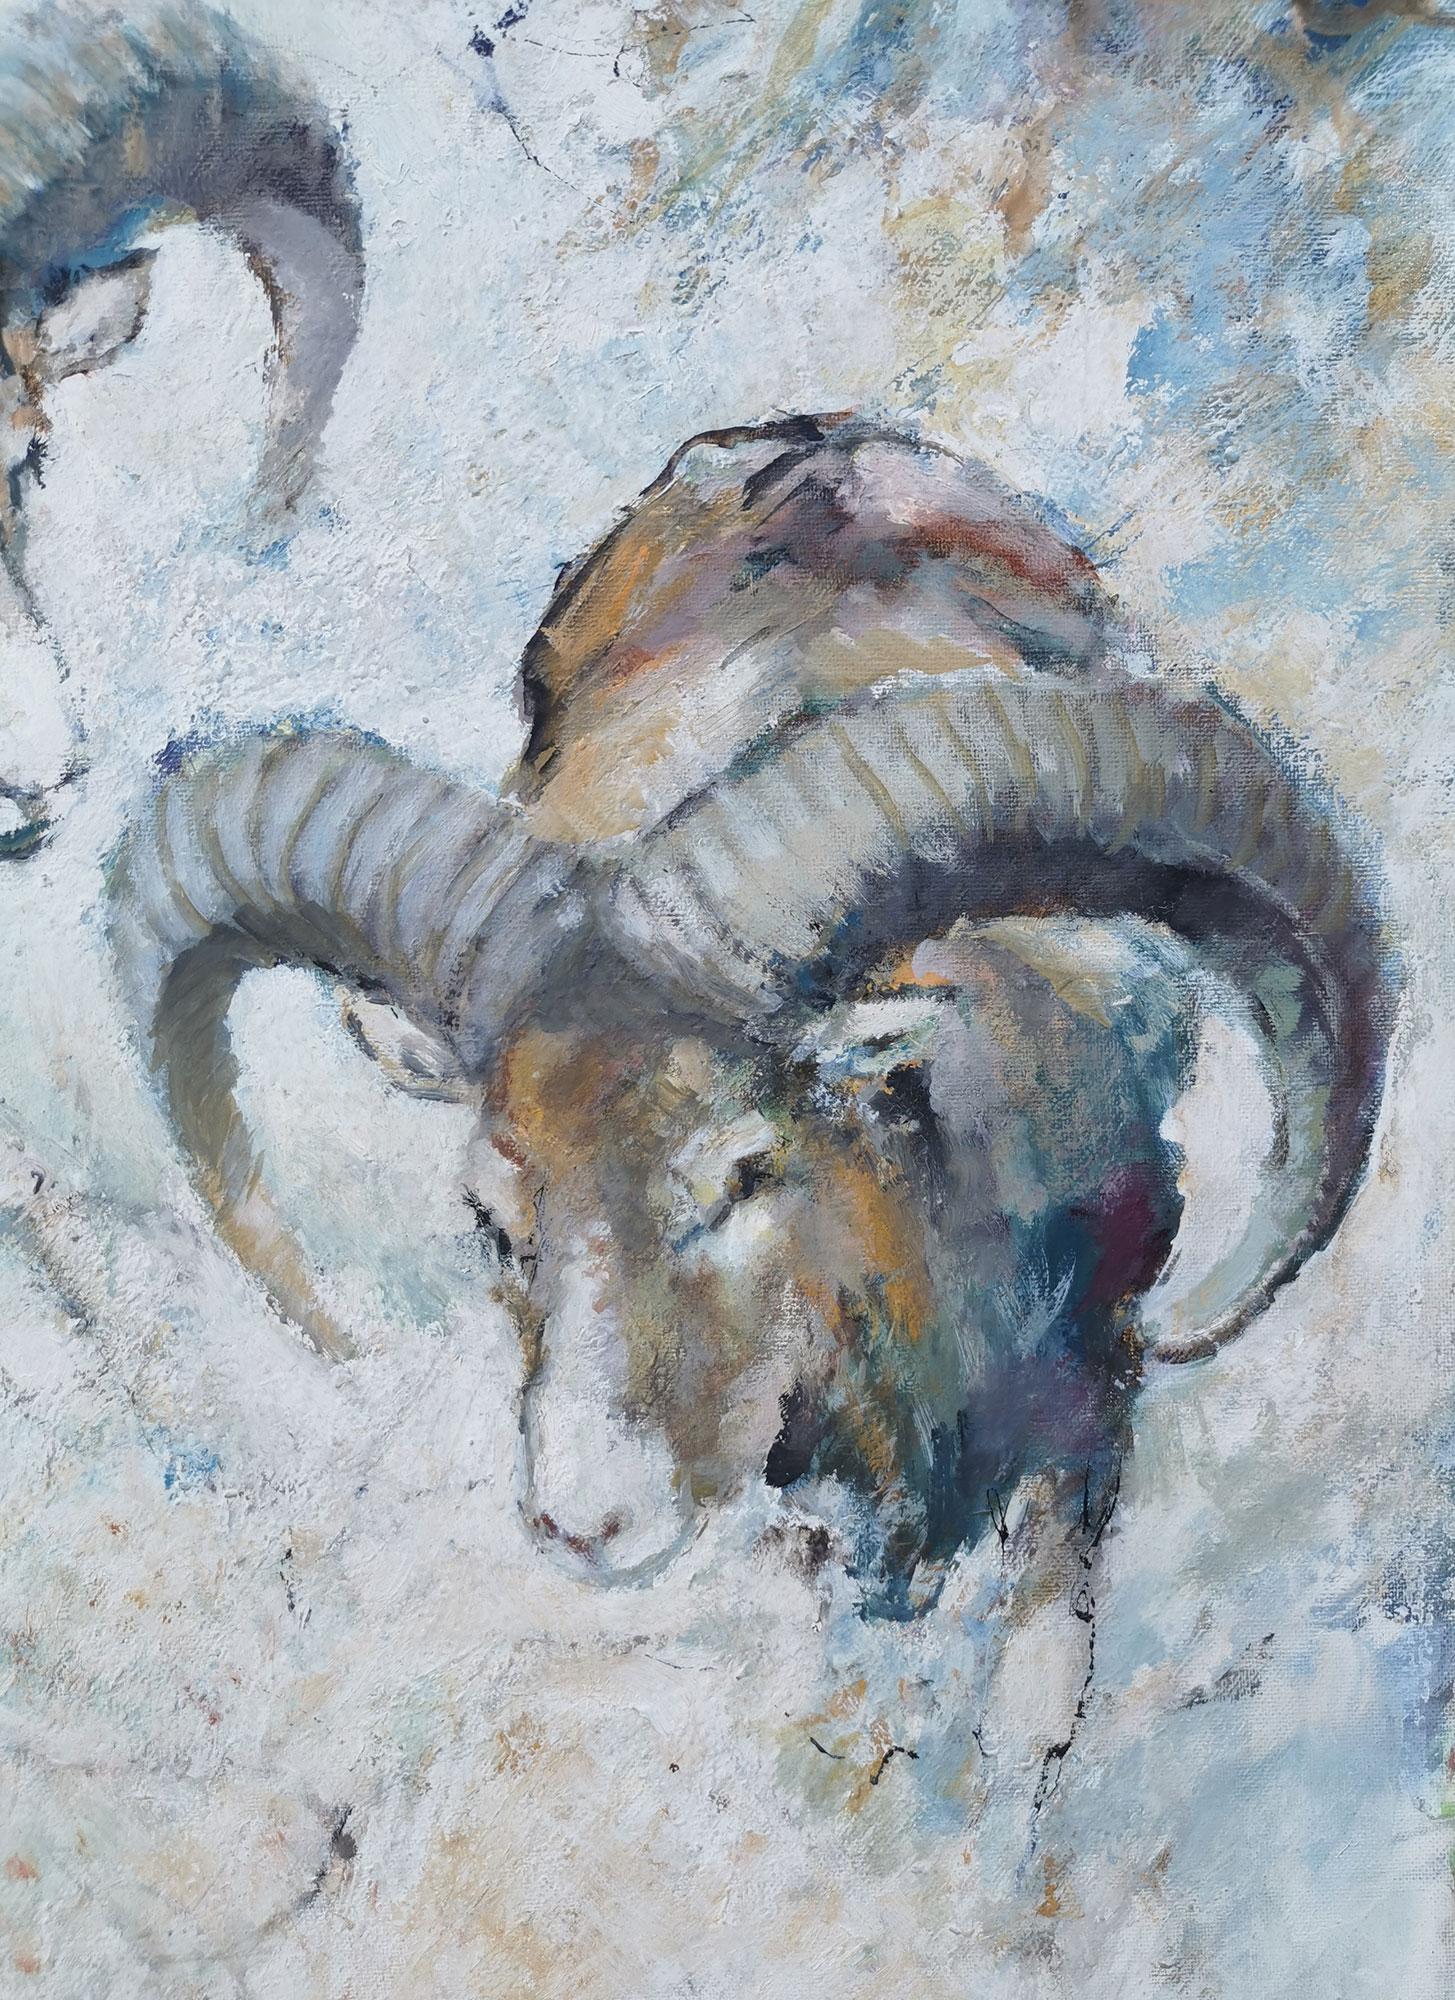 Oiled Mouflons in the Snow Oil on Canvas Painting by Willi Schütz, 1971